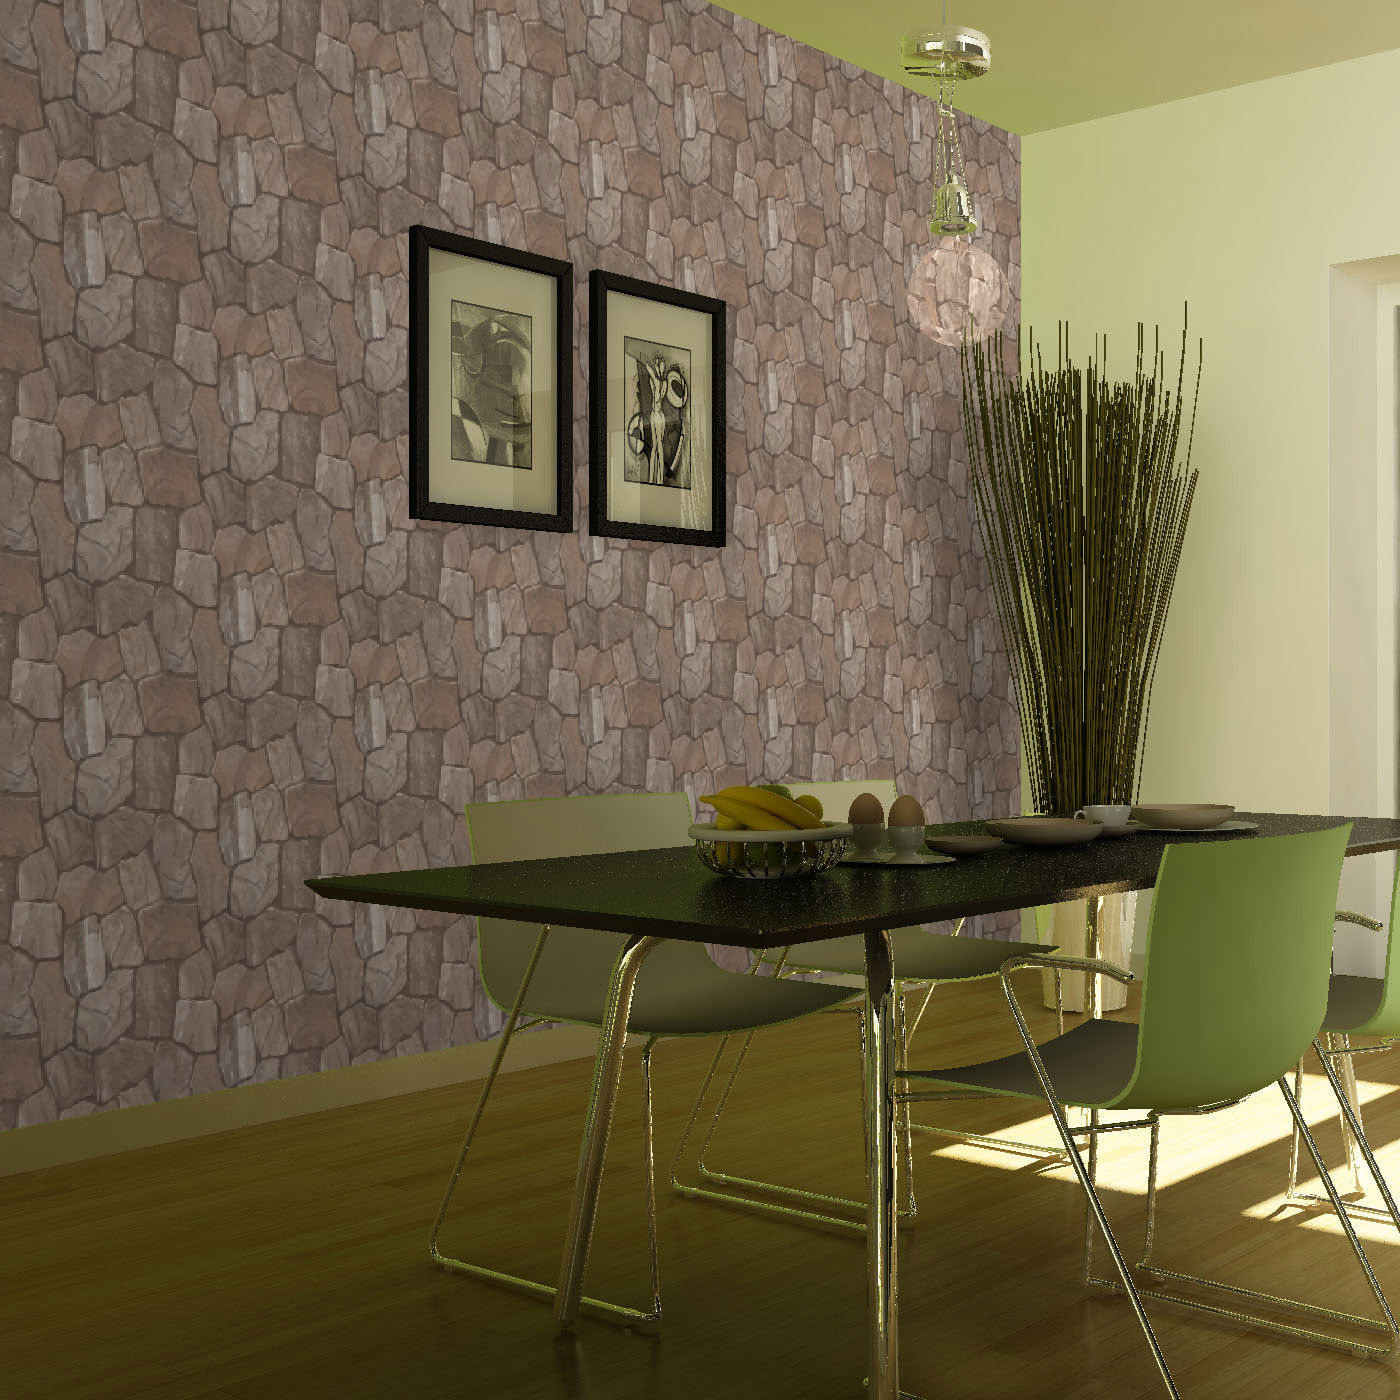 Details About Castle Wall Brick Stone Textured Wallpaper Kitchen